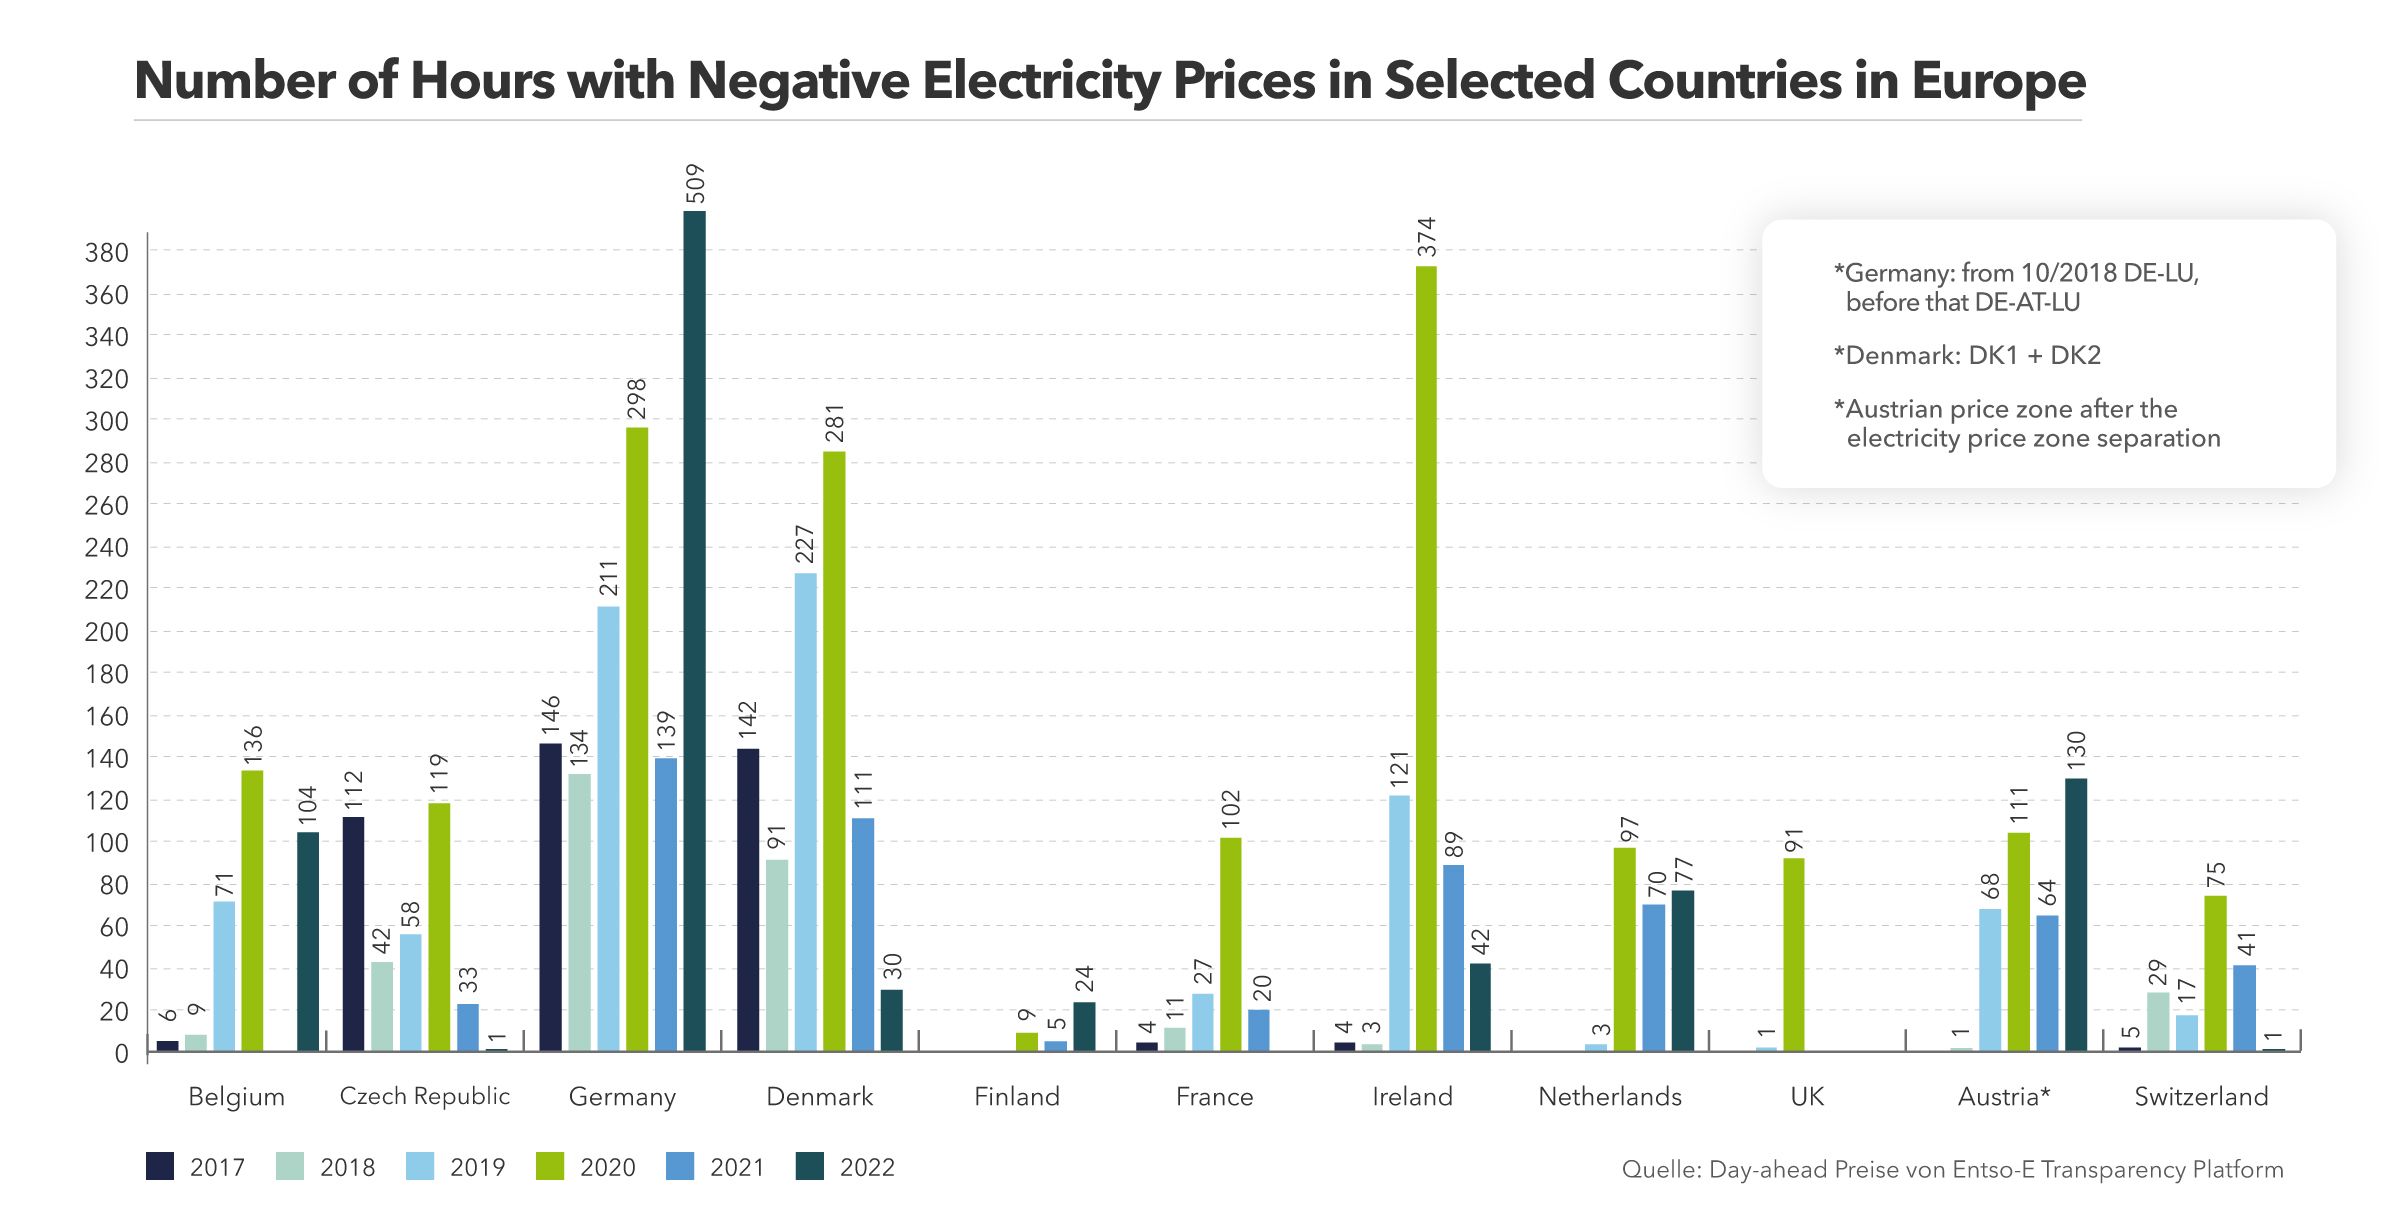 Bar chart showing the number of hours with negative electricity prices on the day-ahead market in selected European countries since 2017.